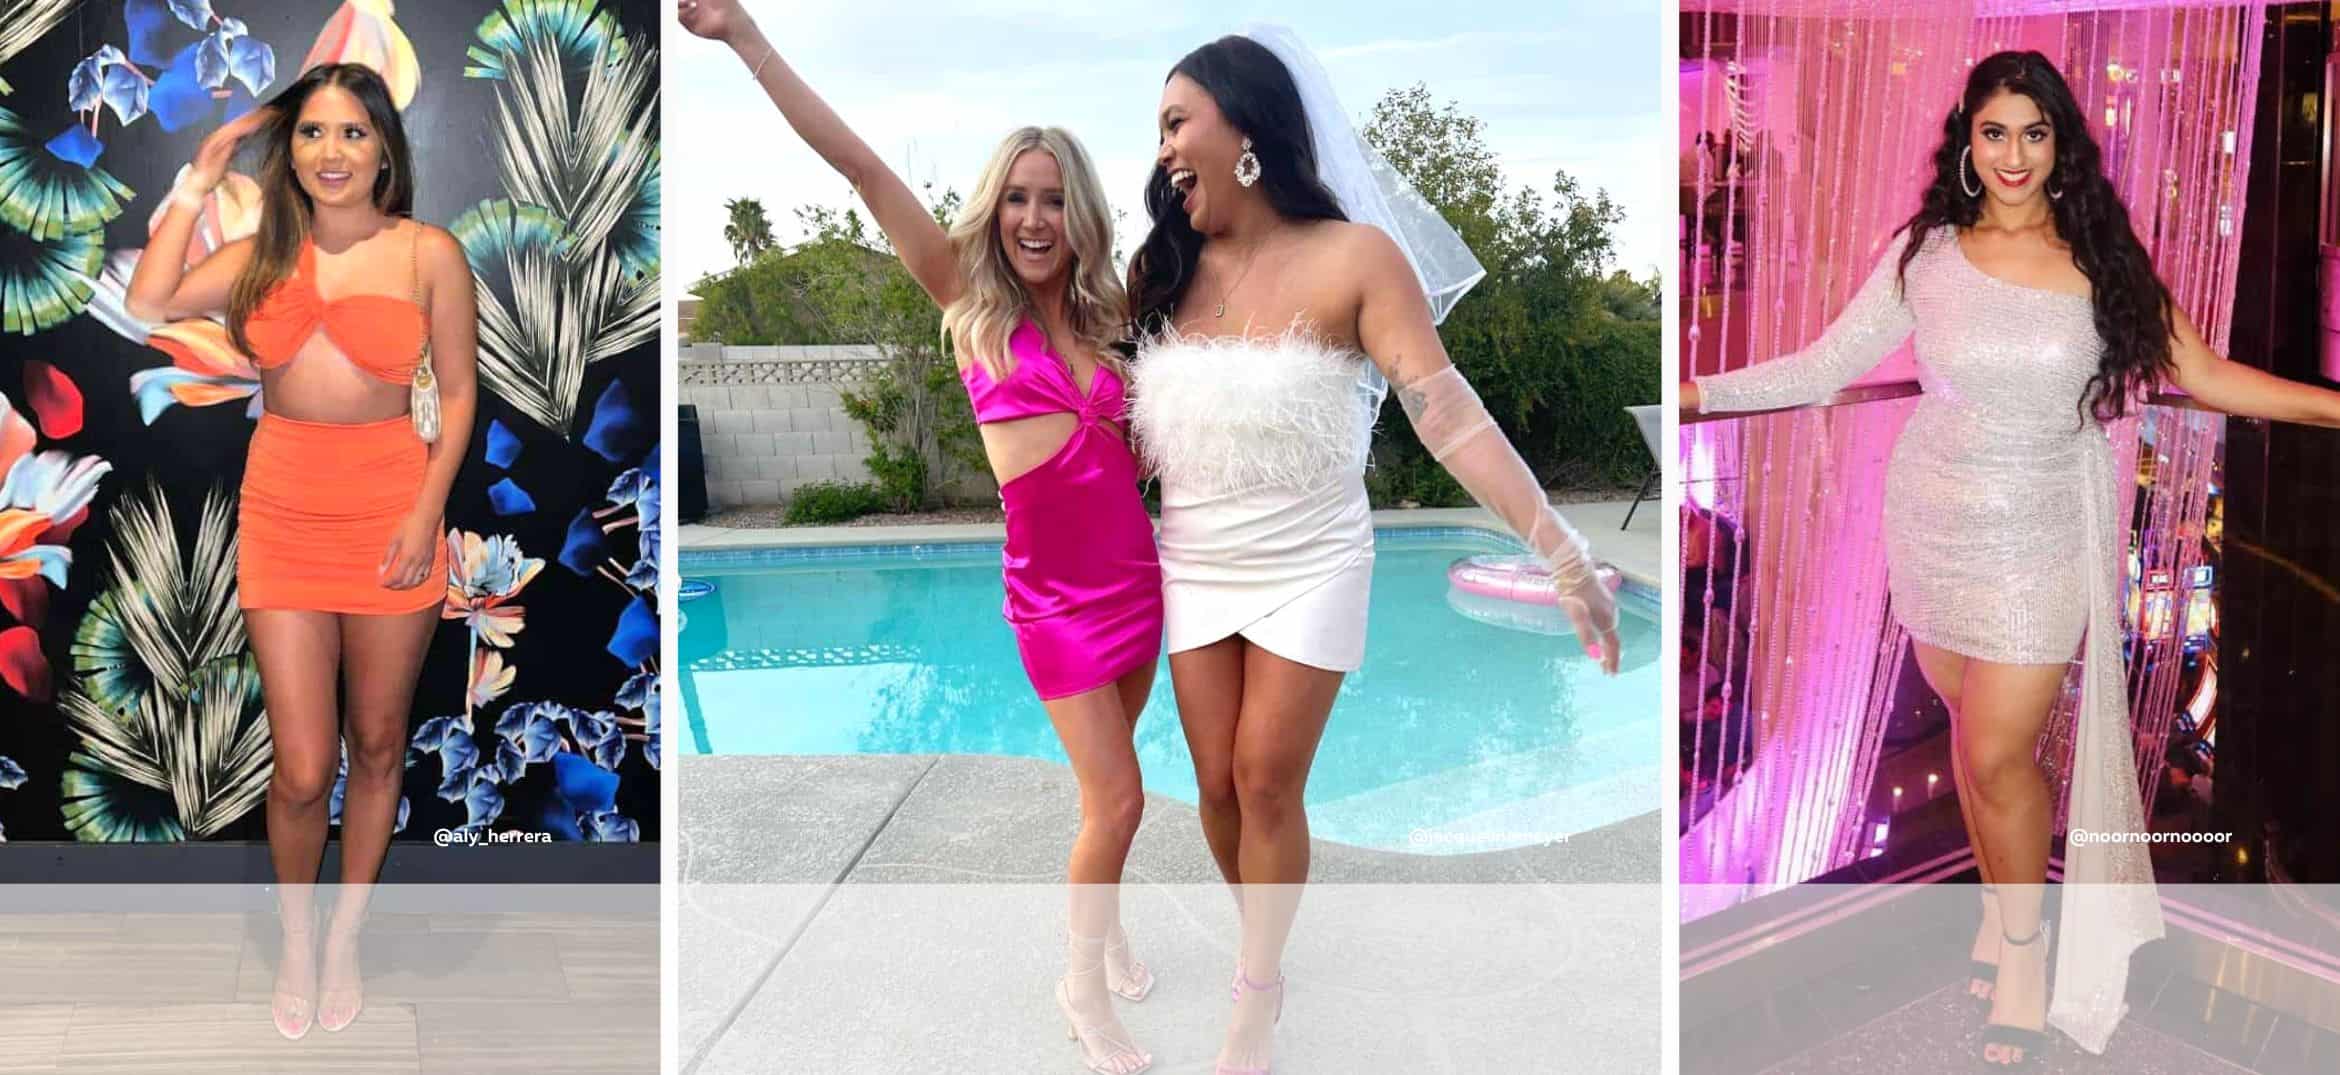 Bachelorette Party Outfits For a Getaway Weekend